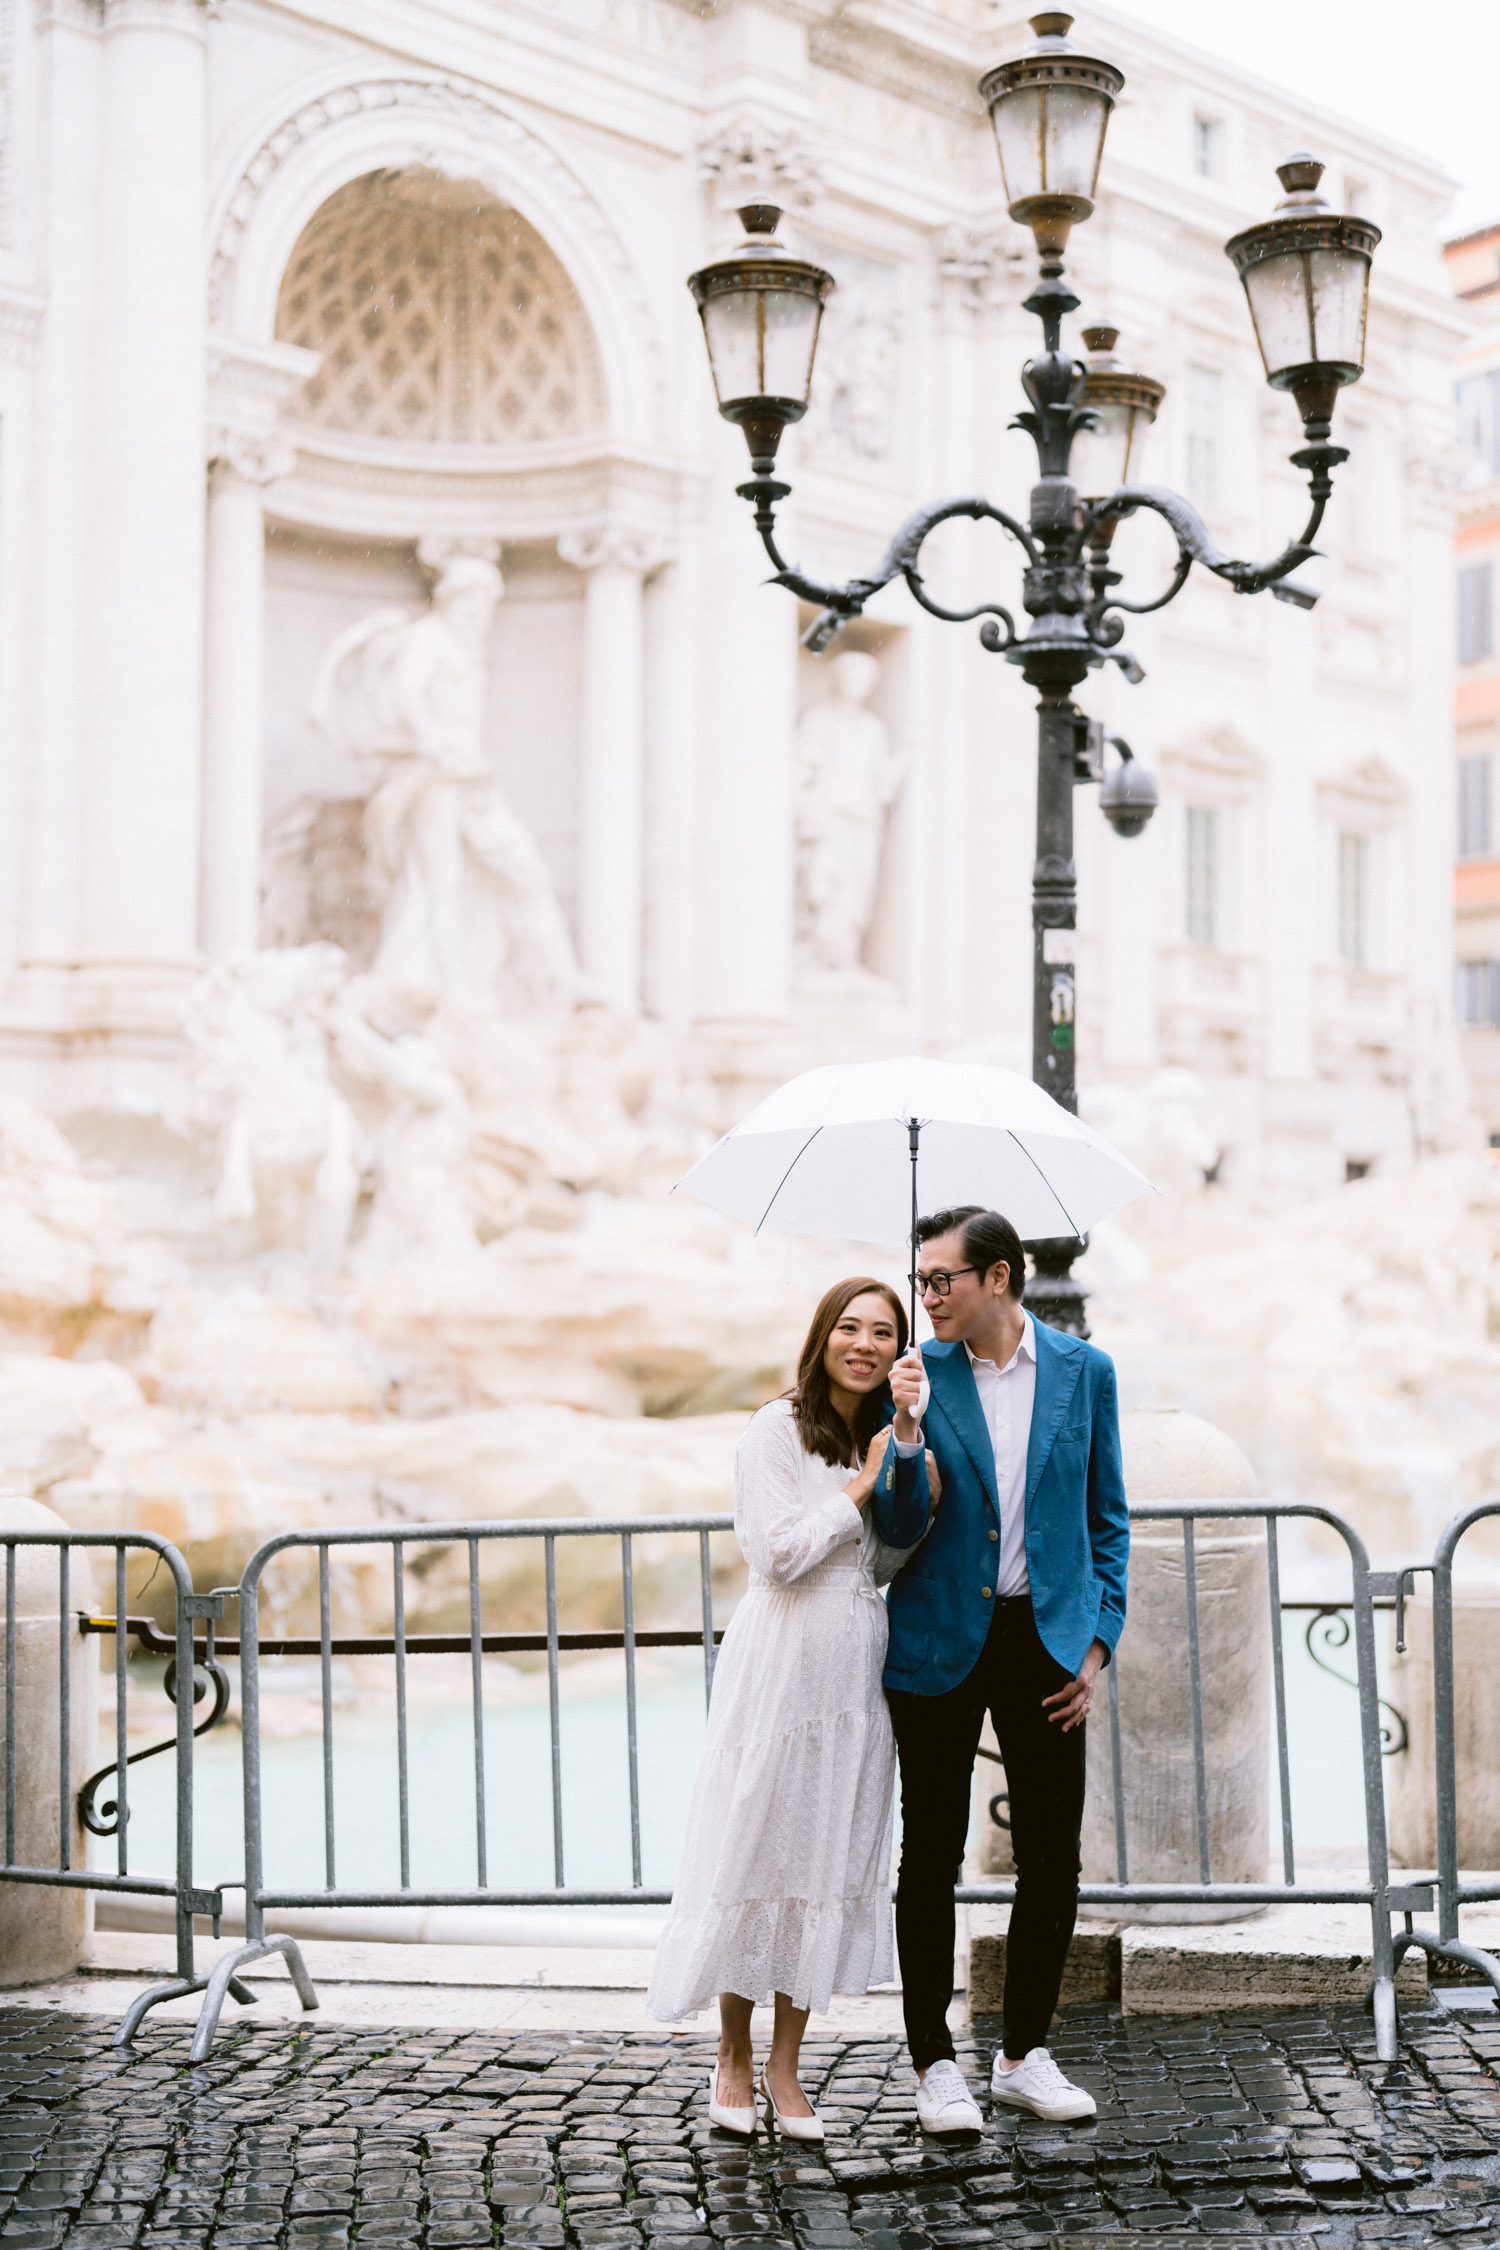 book photographer for a photoshoot in Rome